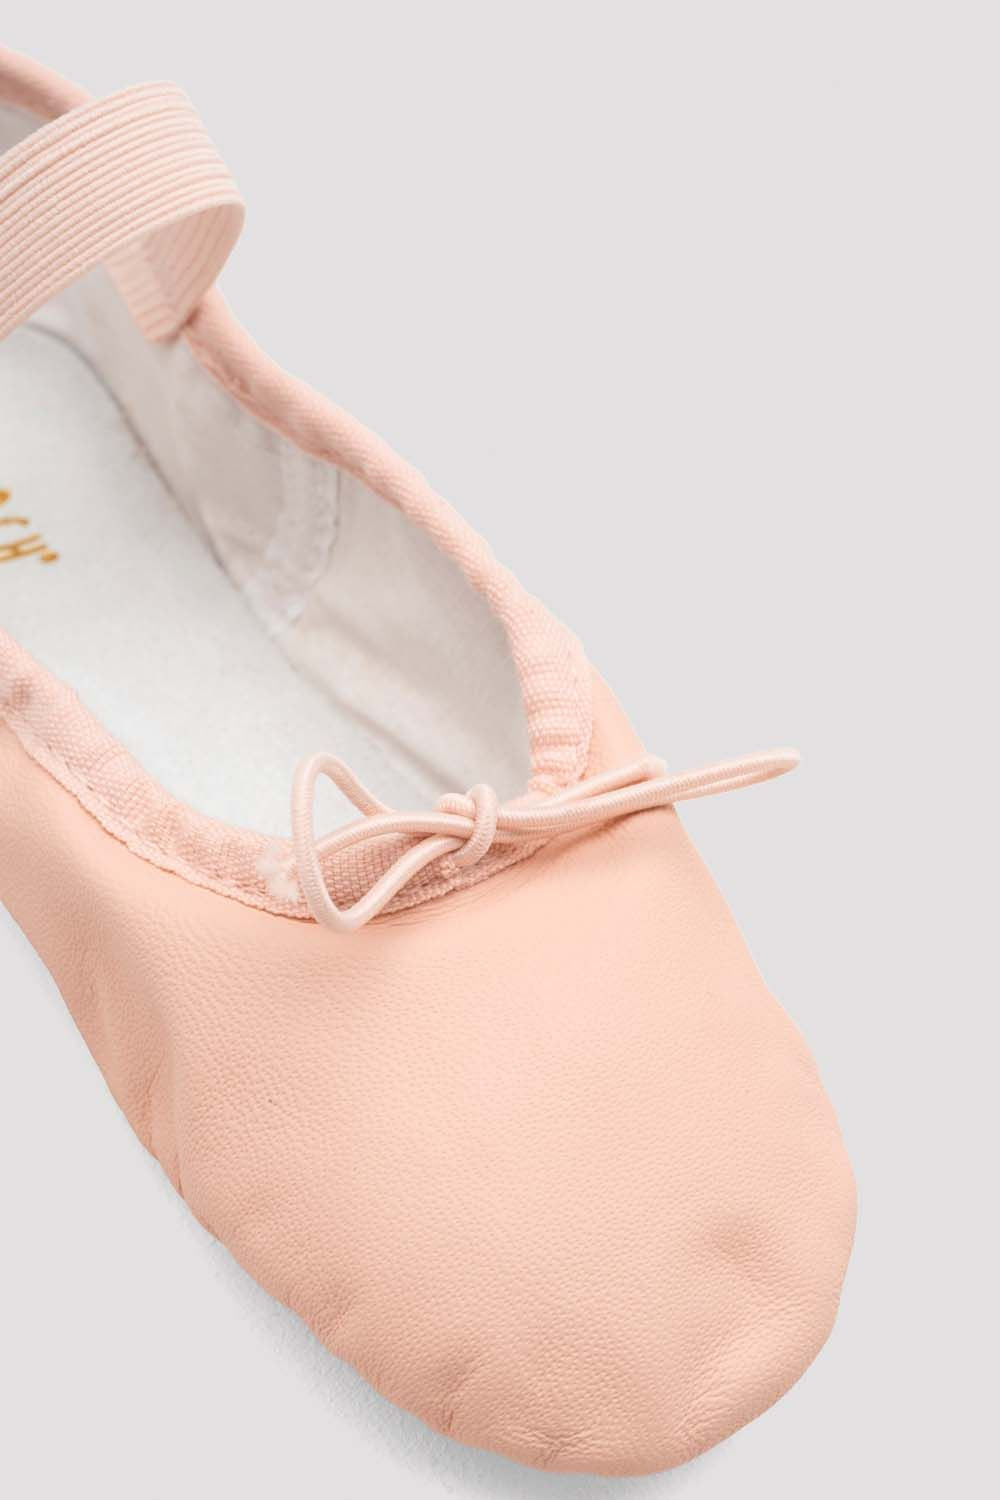  Bloch Dance A0185 Covert Elastic Ballet/Pointe Shoe Elastic,  Pink, One Size : Clothing, Shoes & Jewelry